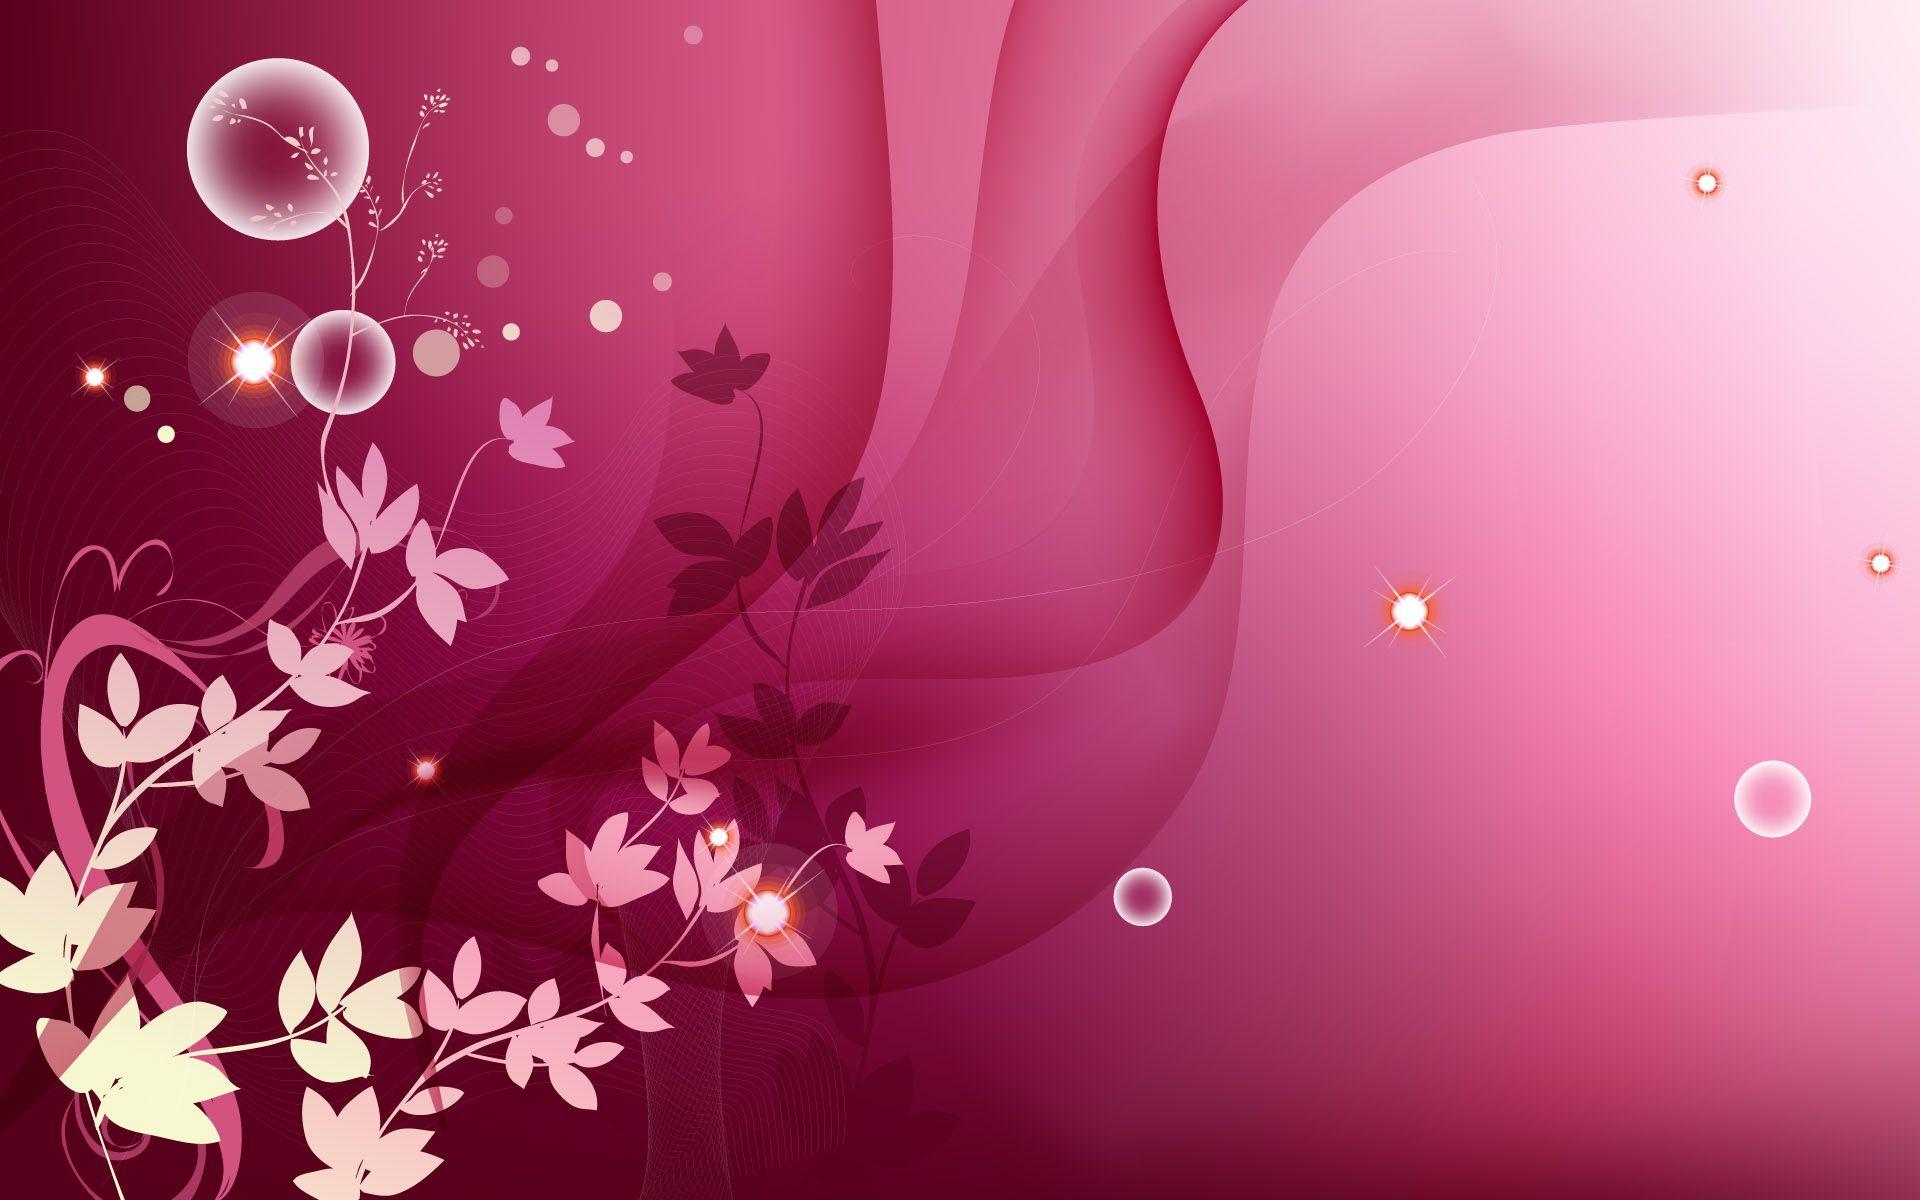 Download Vector Butterfly Pink Wallpaper 1920x1200. Full HD